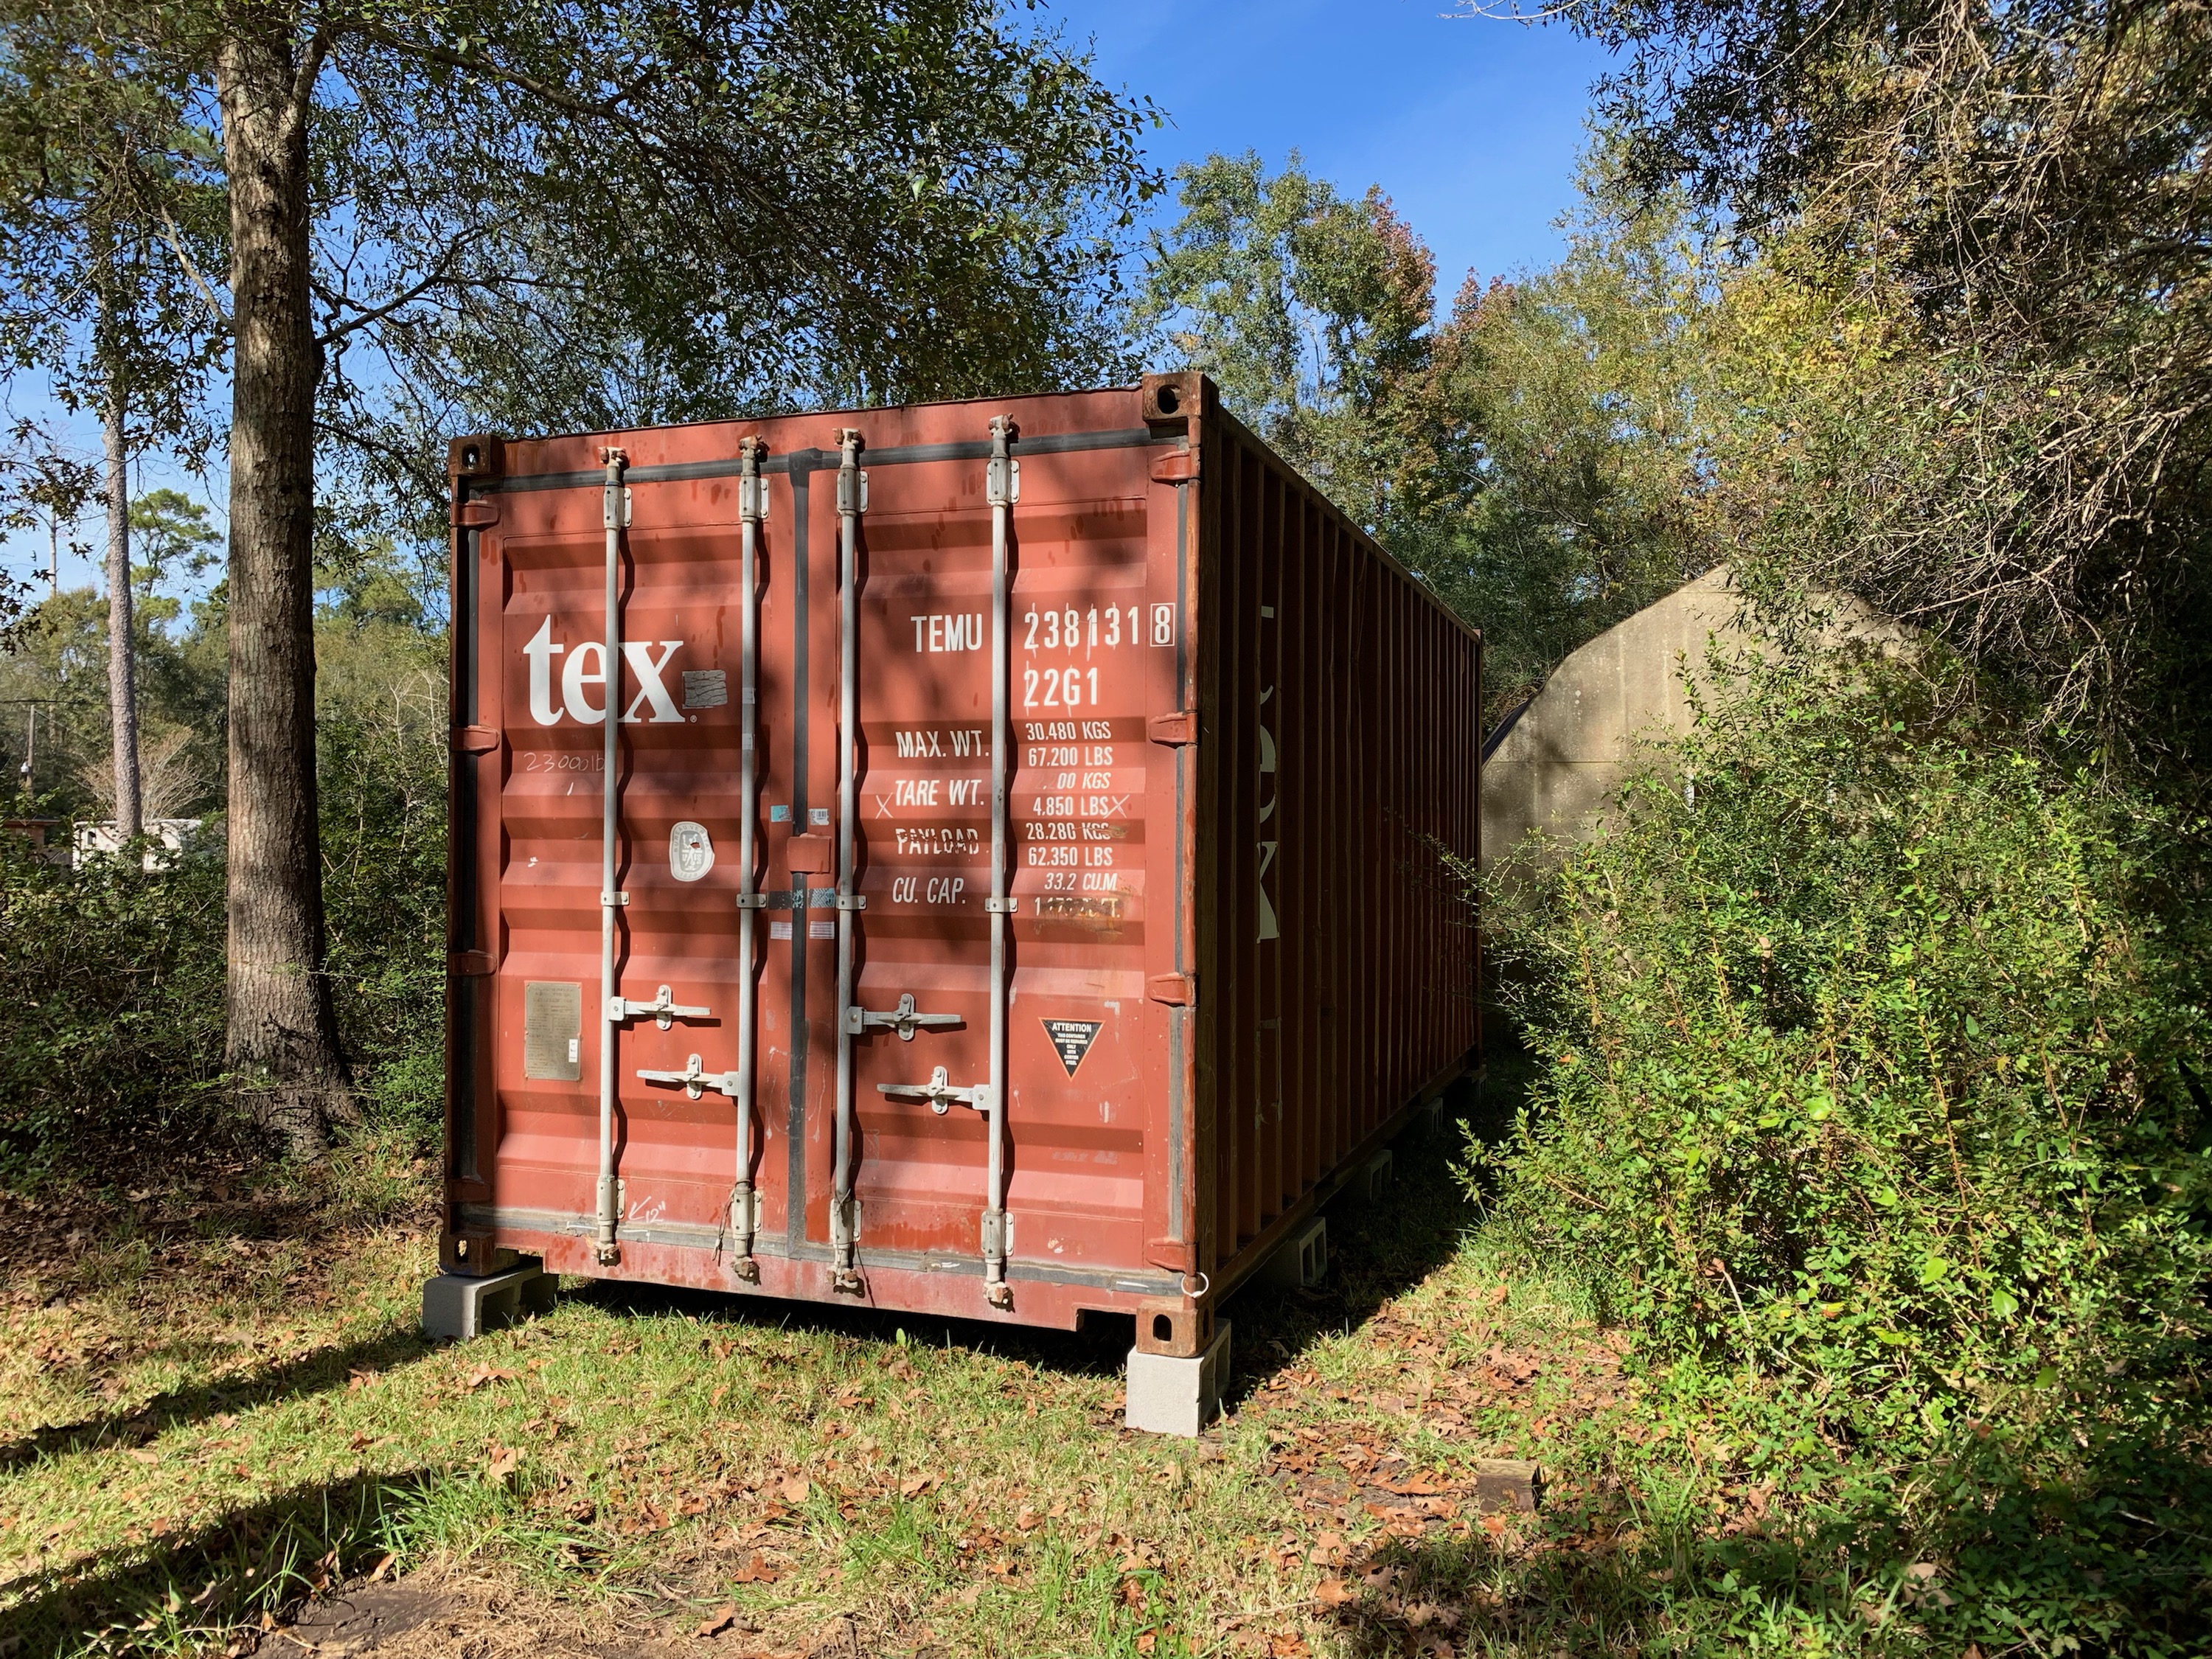 For sale New and Used Shipping Containers